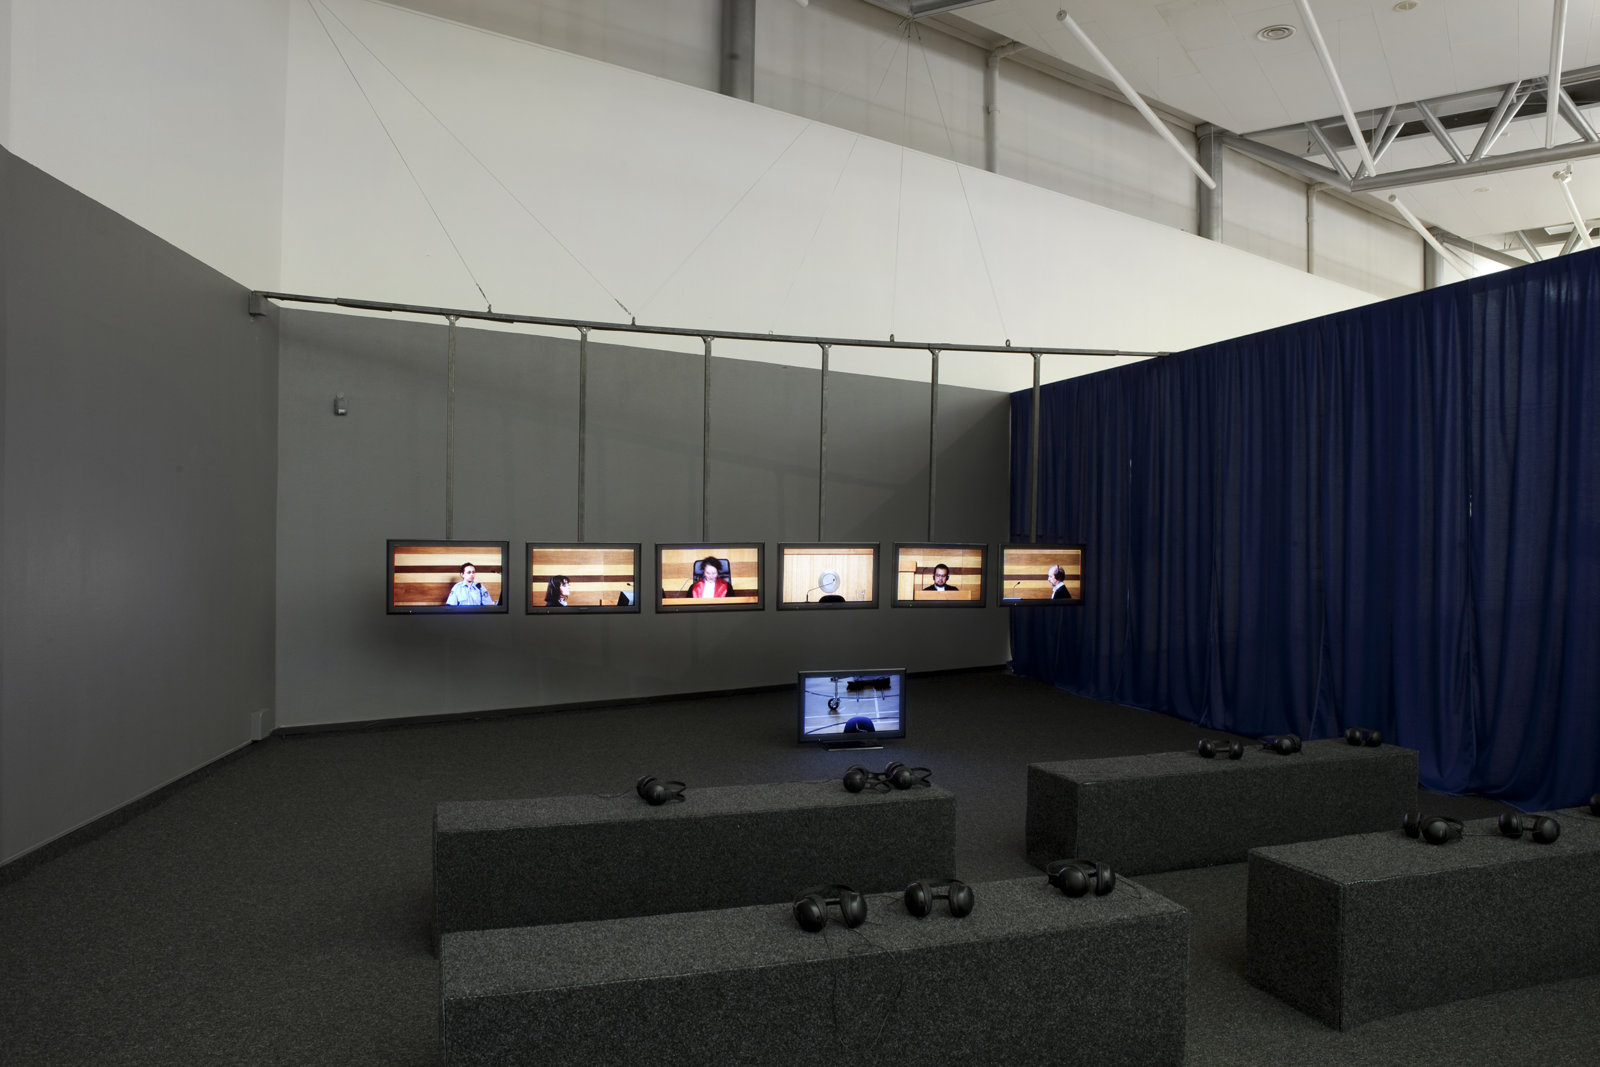 Judy Radul, World Rehearsal Court, 2009, 7 channel video installation, running time 4 hours; 4 servo-controlled cameras, live camera position playback system, monitors, dolly, track, found and built objects, plexiglass, dimensions variable. Installation view, World Rehearsal Court, Henie Onstad Kunstsenter, Høvikodden, Norway, 2011